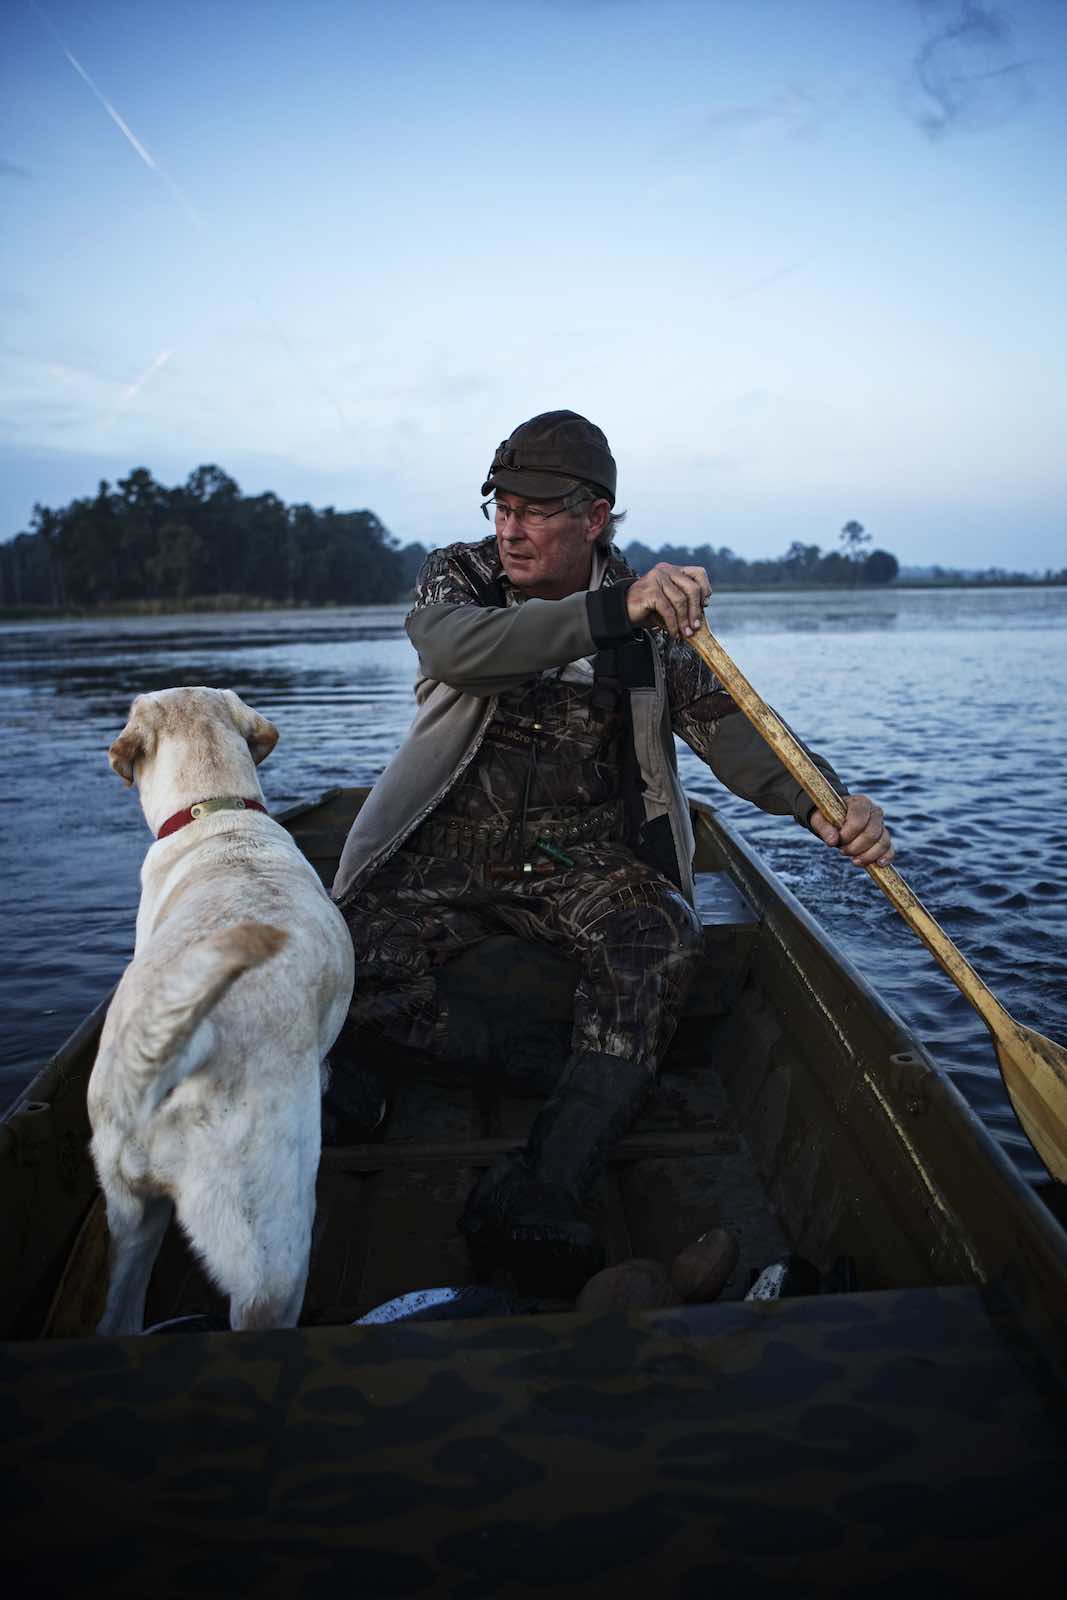 Jody Horton Photography - Hunter and his dog rowing through the water in the evening. 